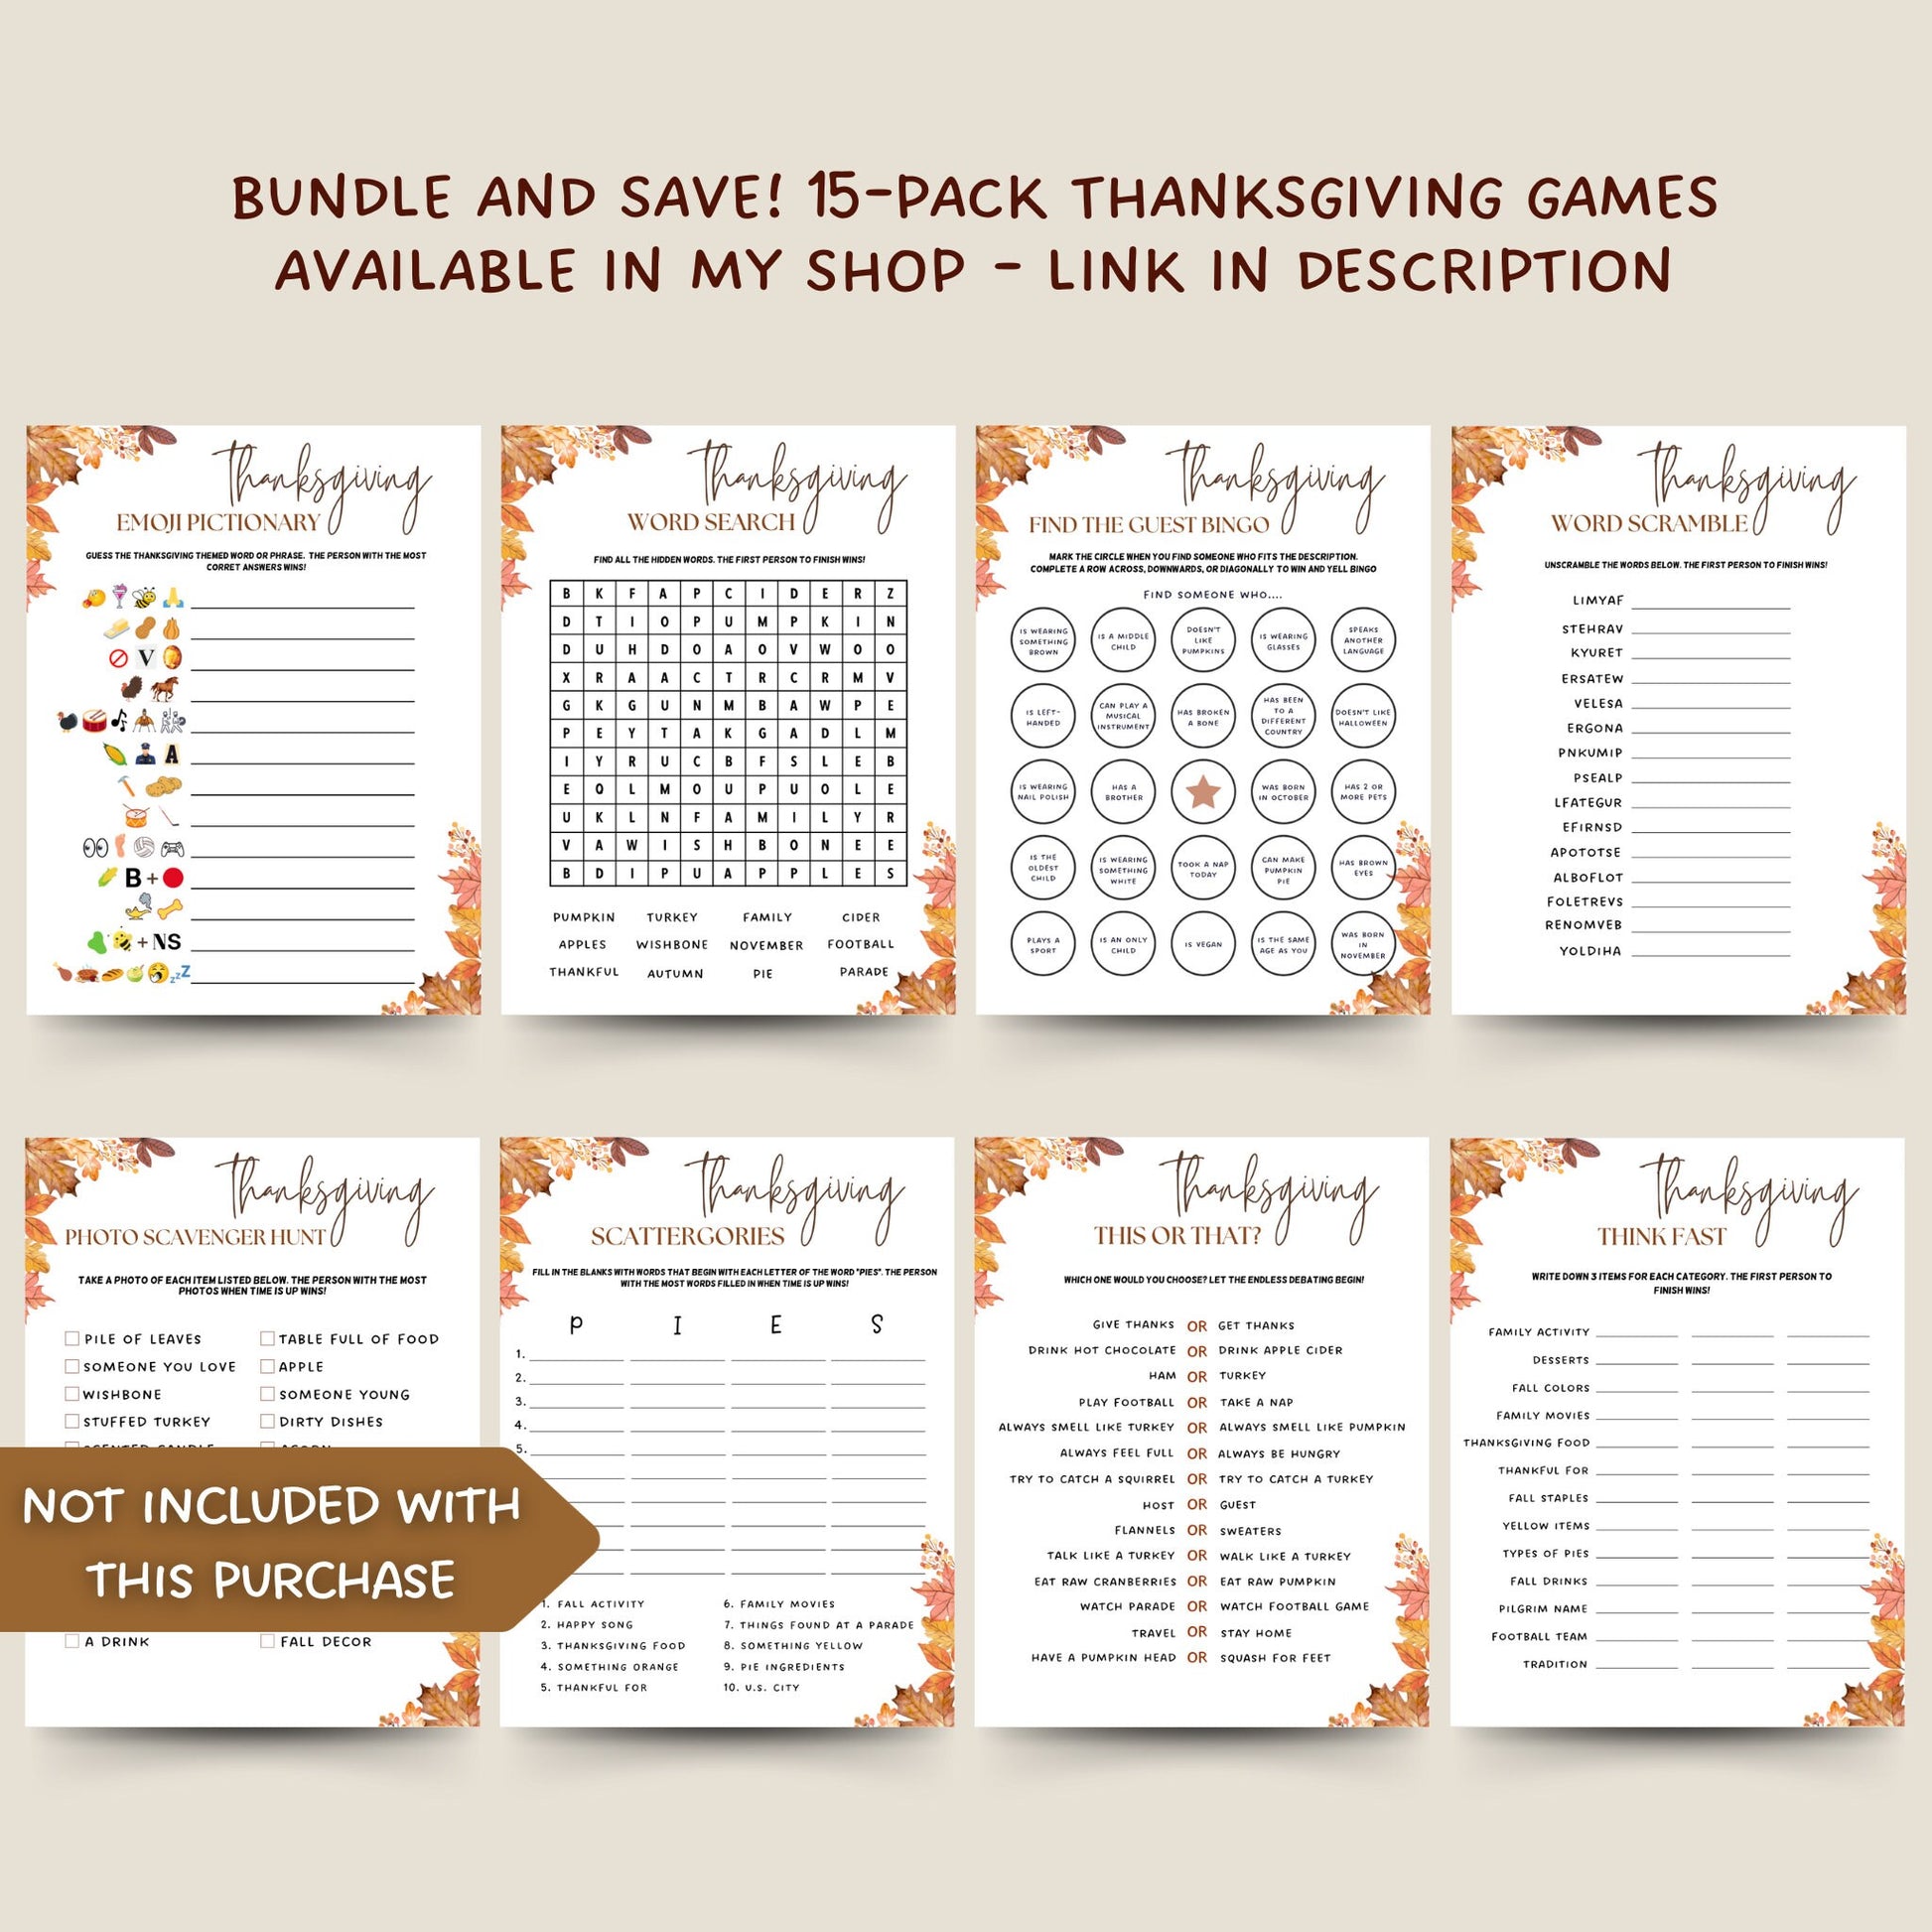 Thanksgiving Trivia Game Printable, Fun Friendsgiving Game, Turkey Day, Fall Holiday Family Activity, Office Work Party Game, Classroom Game